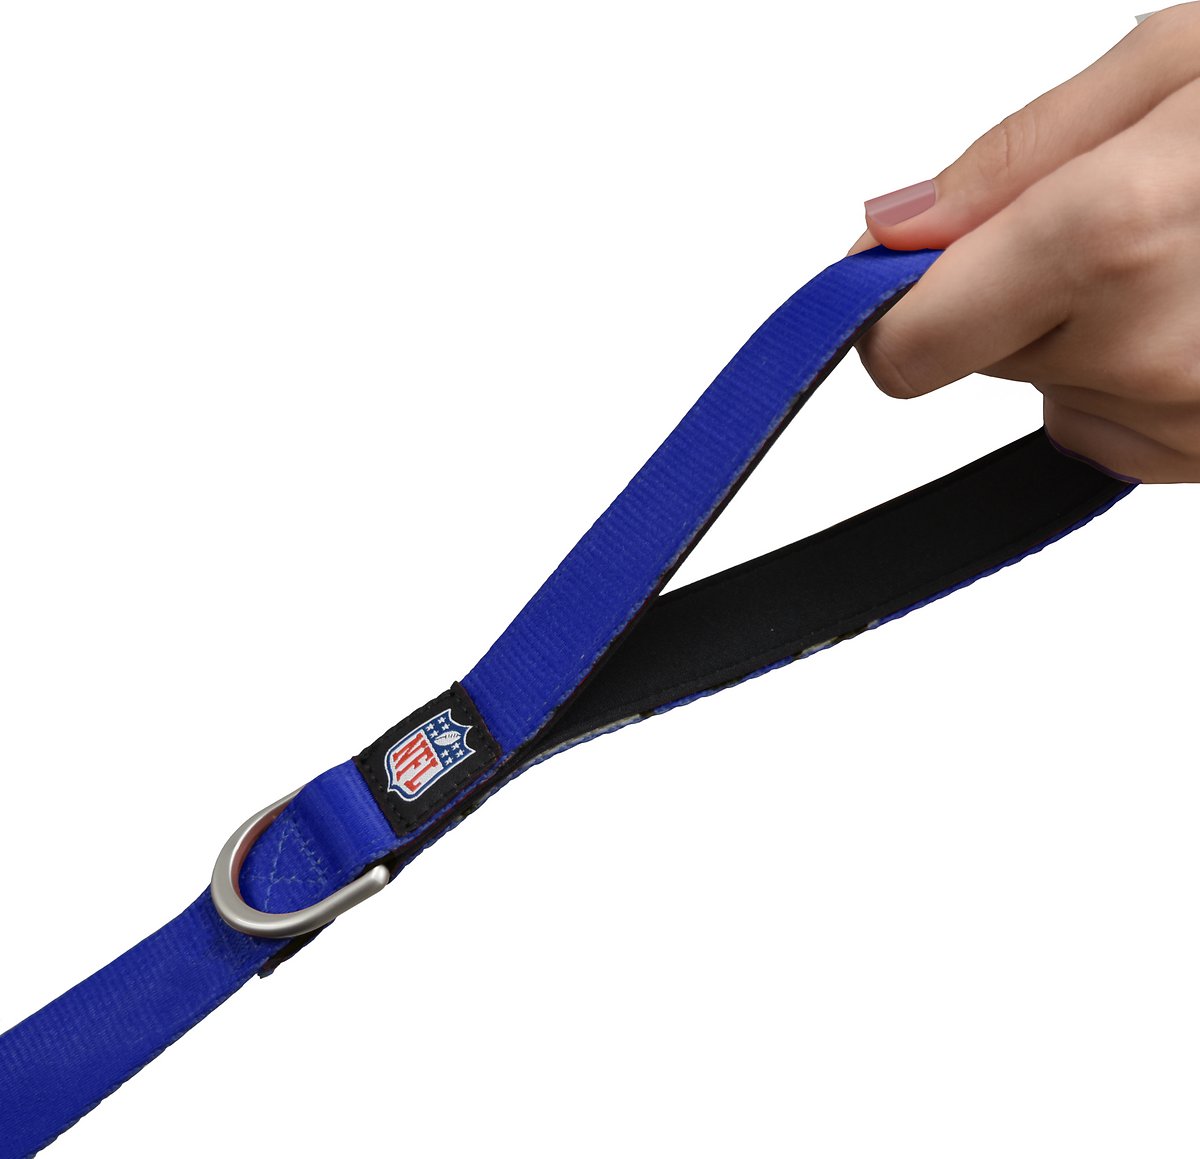 New York Giants Premium Dog Collar or Leash - 3 Red Rovers